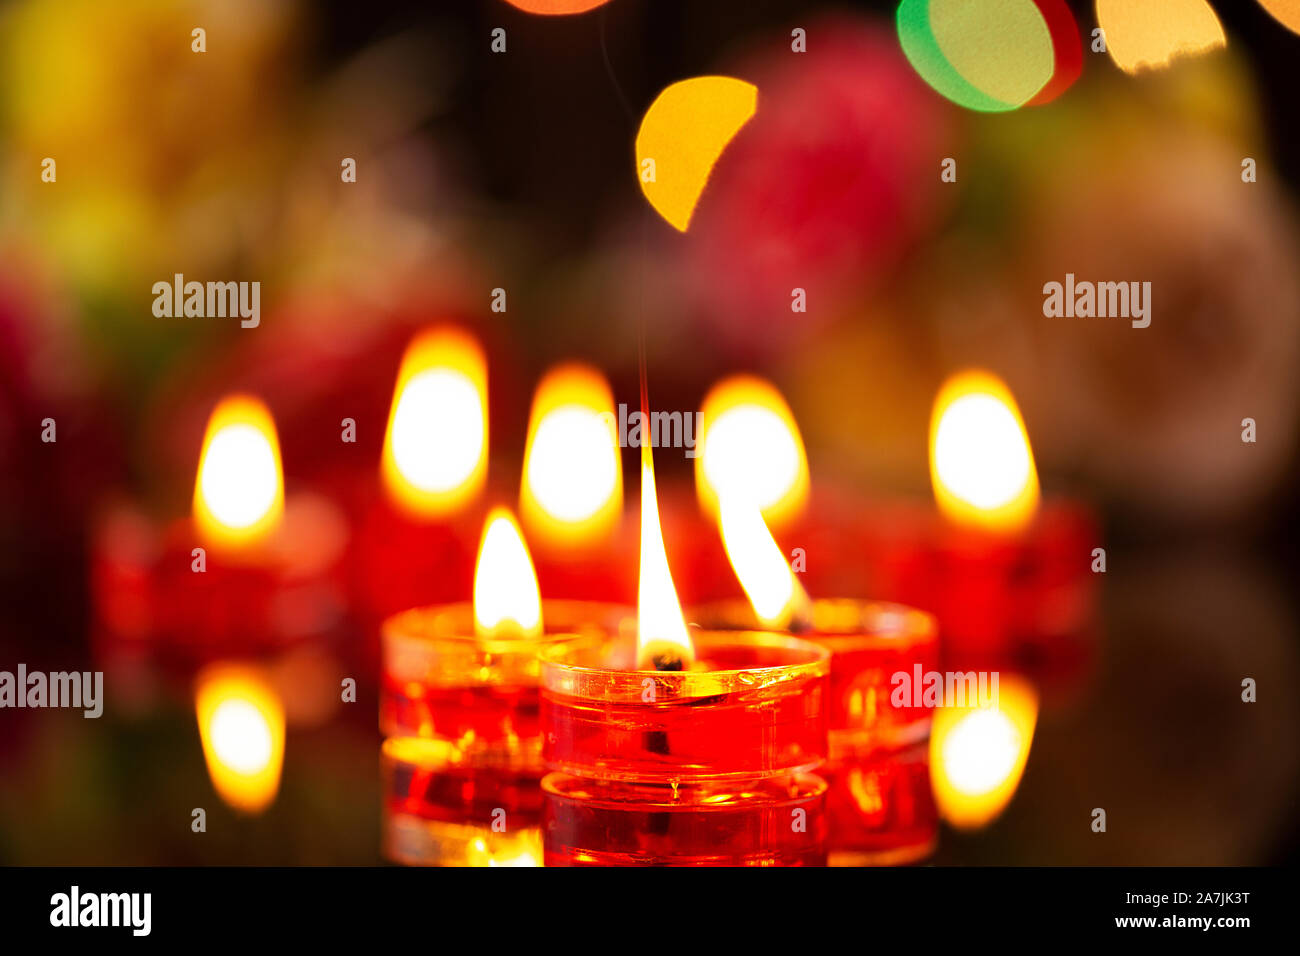 Deepak lights candles lit for domestic decoration to celebrate the ...